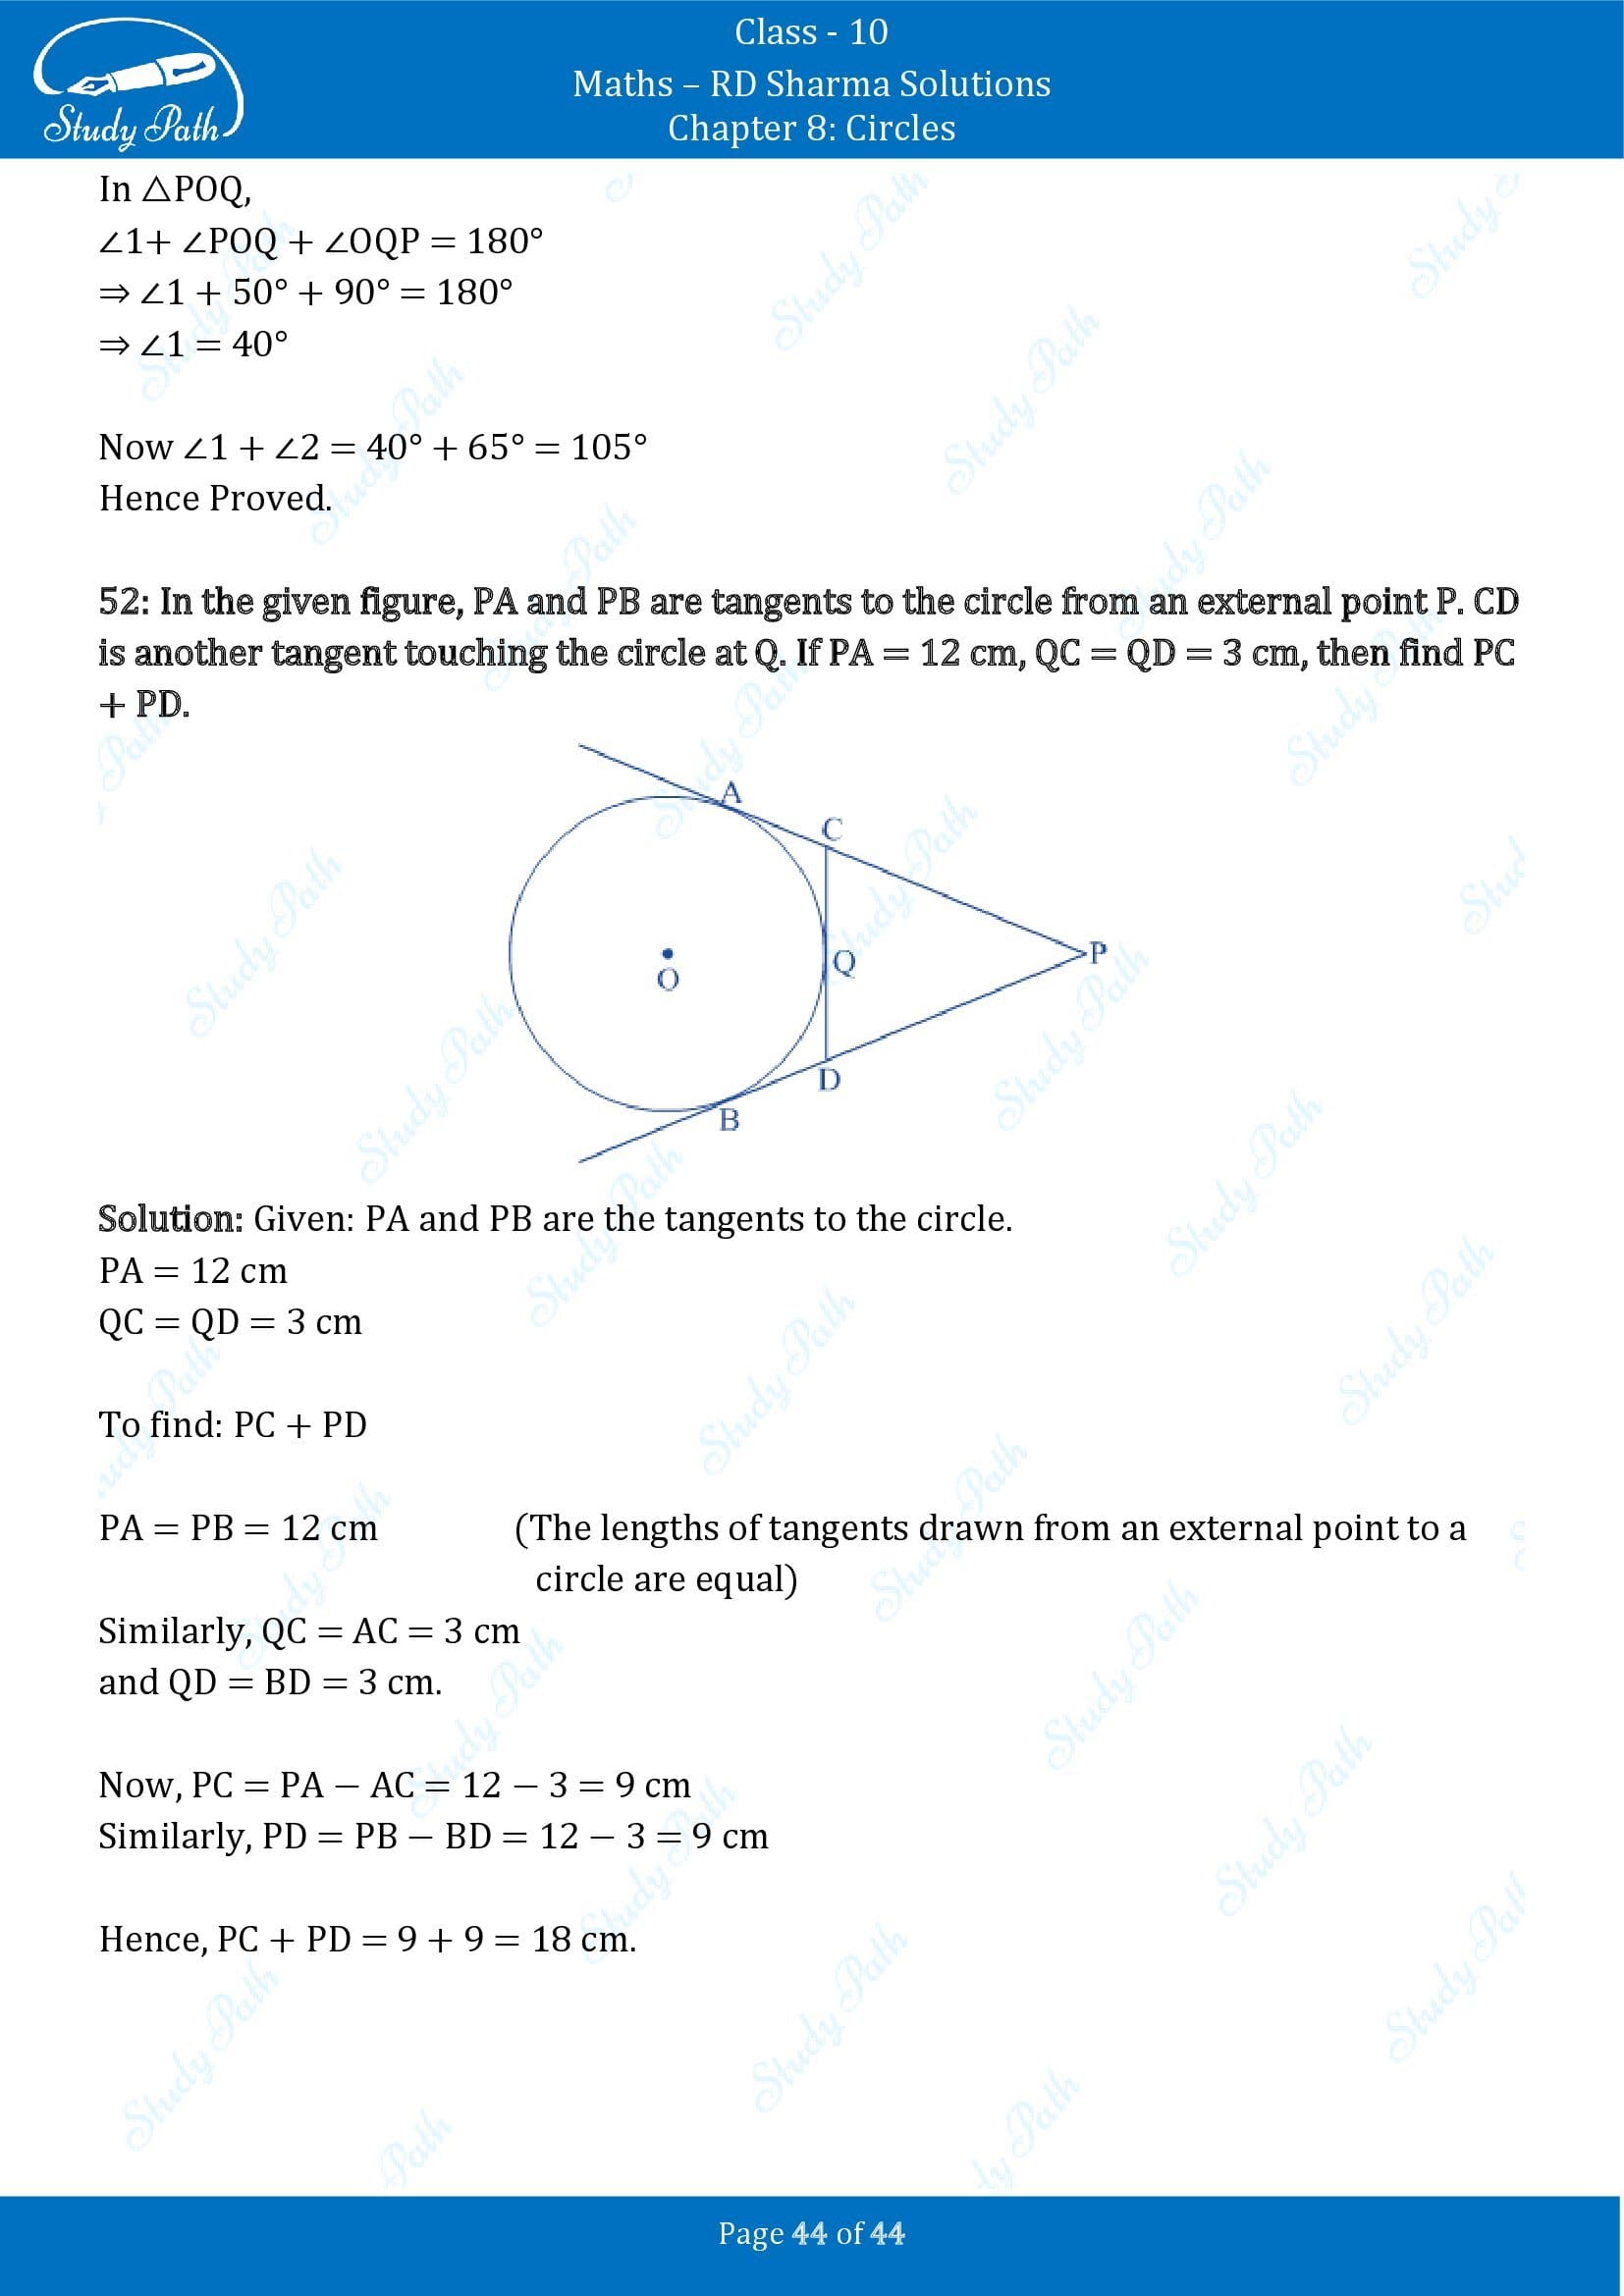 RD Sharma Solutions Class 10 Chapter 8 Circles Exercise 8.2 00044